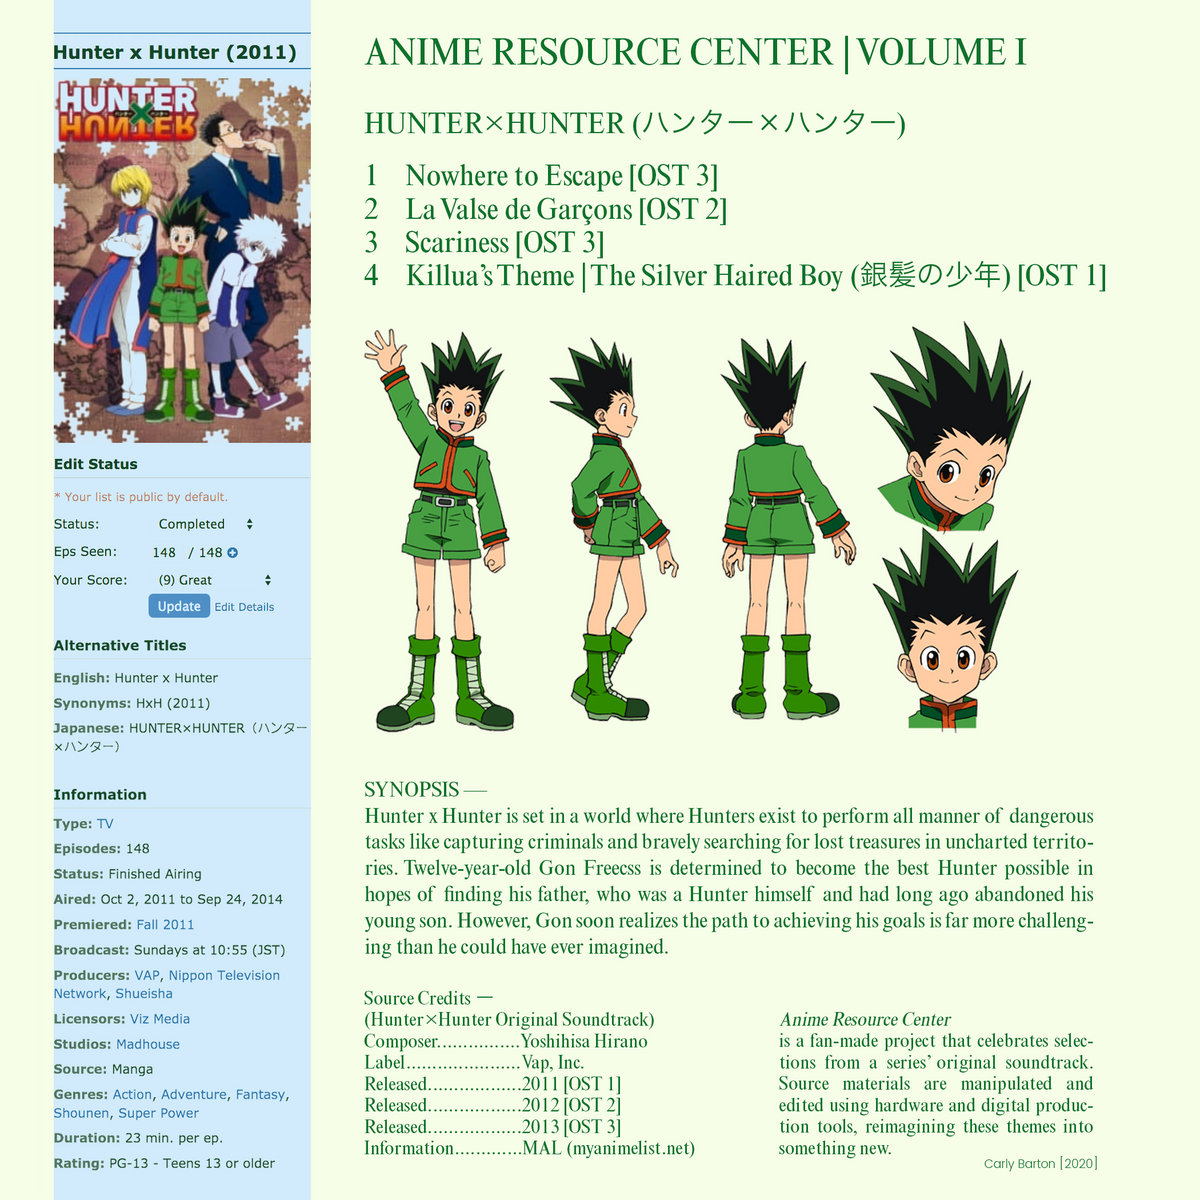 Rafters, Anime Resource Center